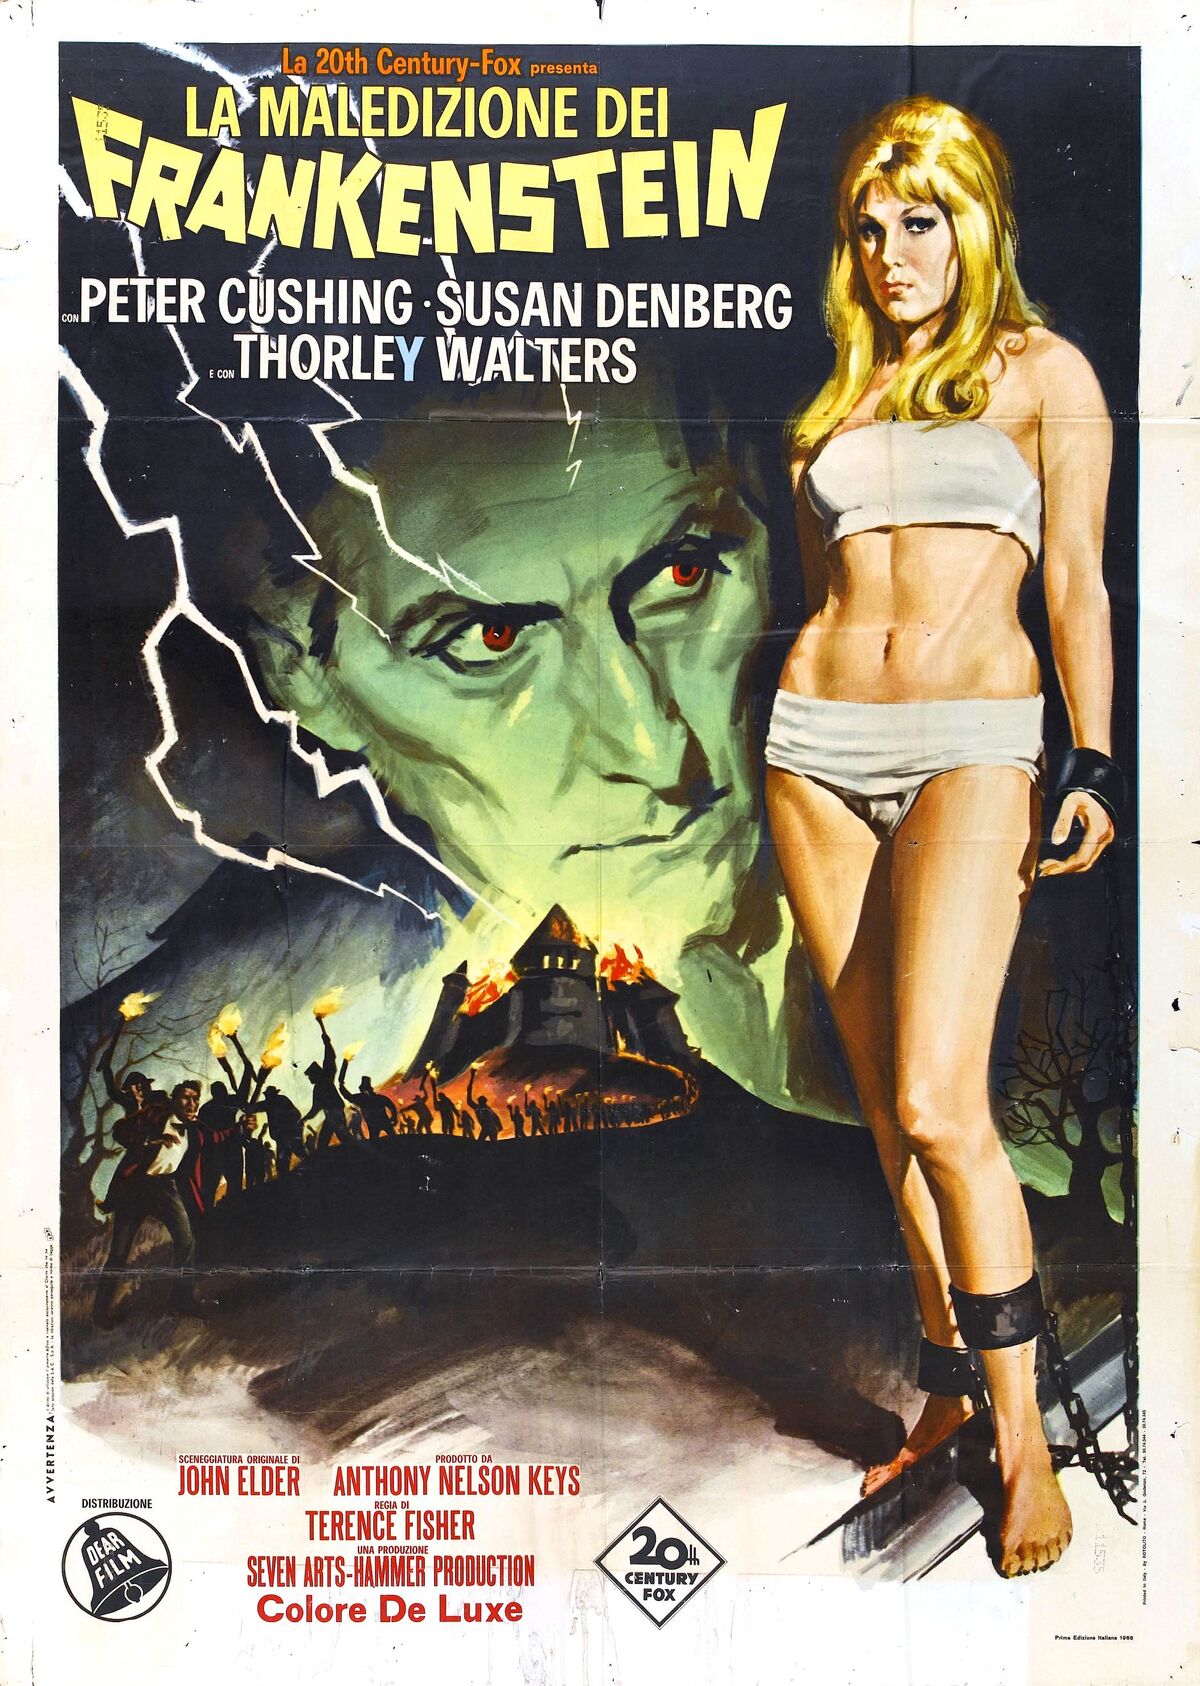 https://static.wikia.nocookie.net/hammerhouseofhorror/images/5/5b/Frankenstein_created_woman_poster_02.jpg/revision/latest/scale-to-width-down/1200?cb=20221019071914